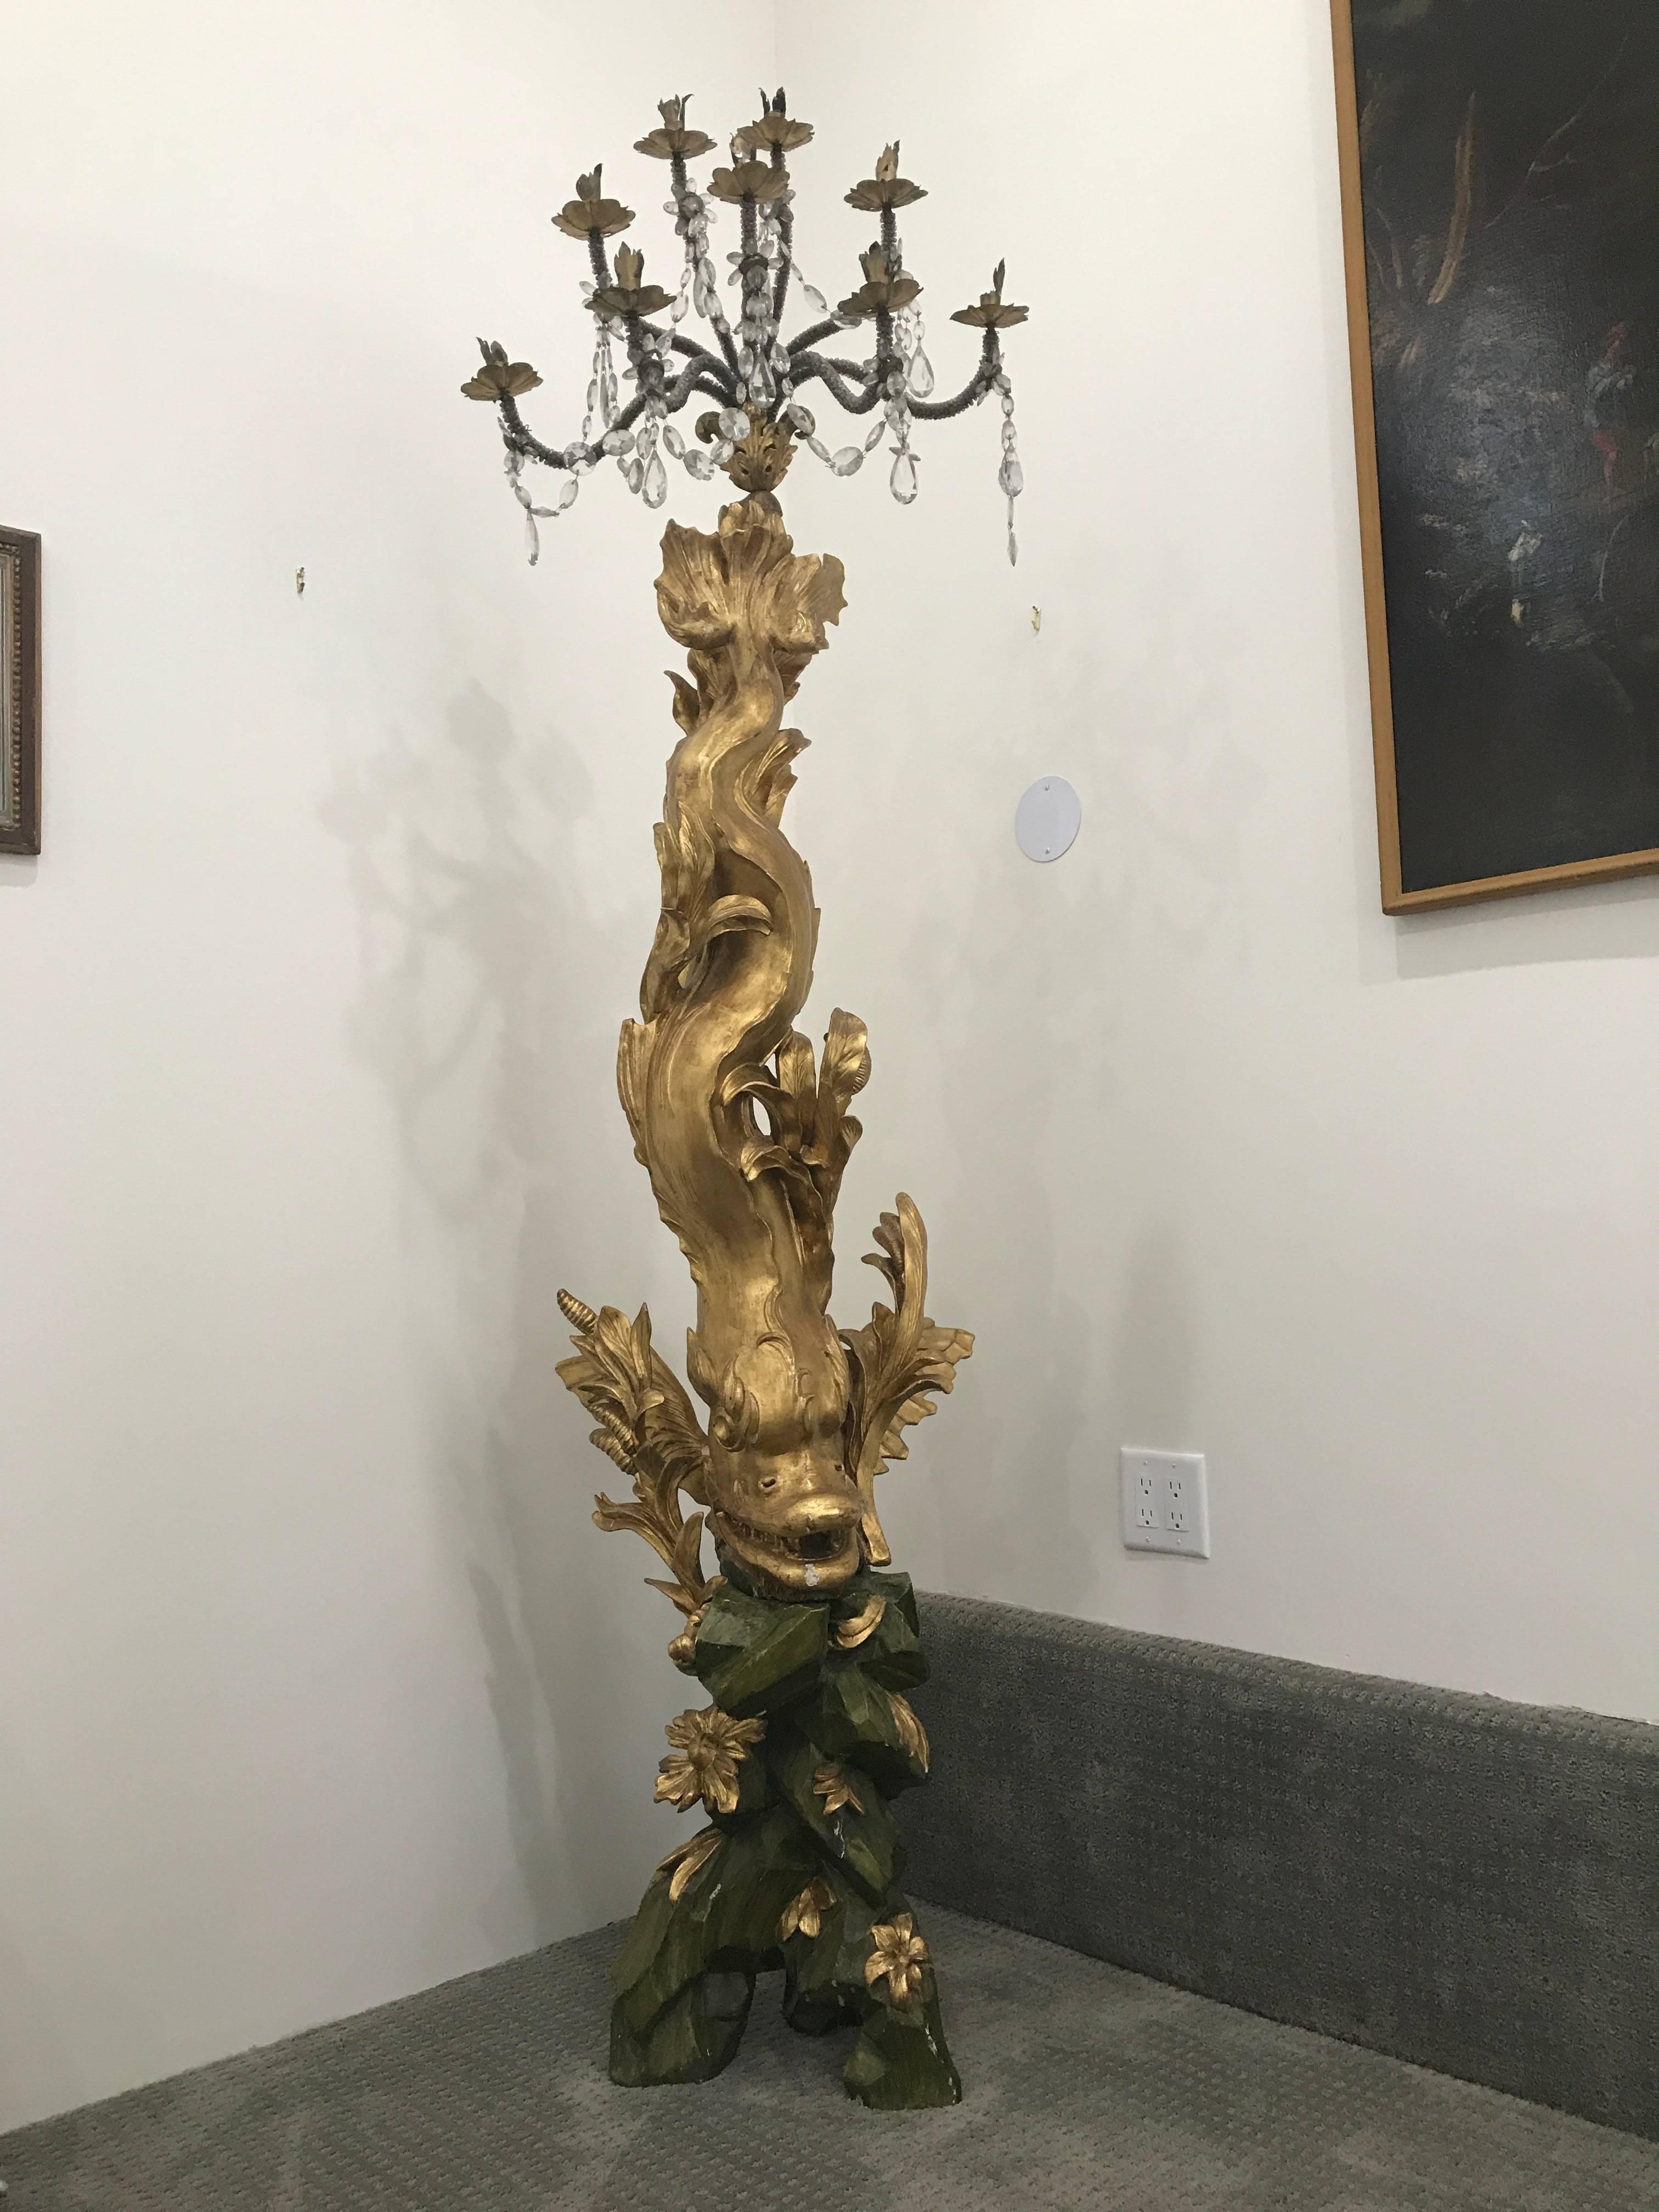 Pair of magnificent 17th century candelabra by Domenico Parodi (1672-1742) with "Certificate of Authenticity."
Triton design with sculpted wood, gilded and painted. Embellished with crystals.